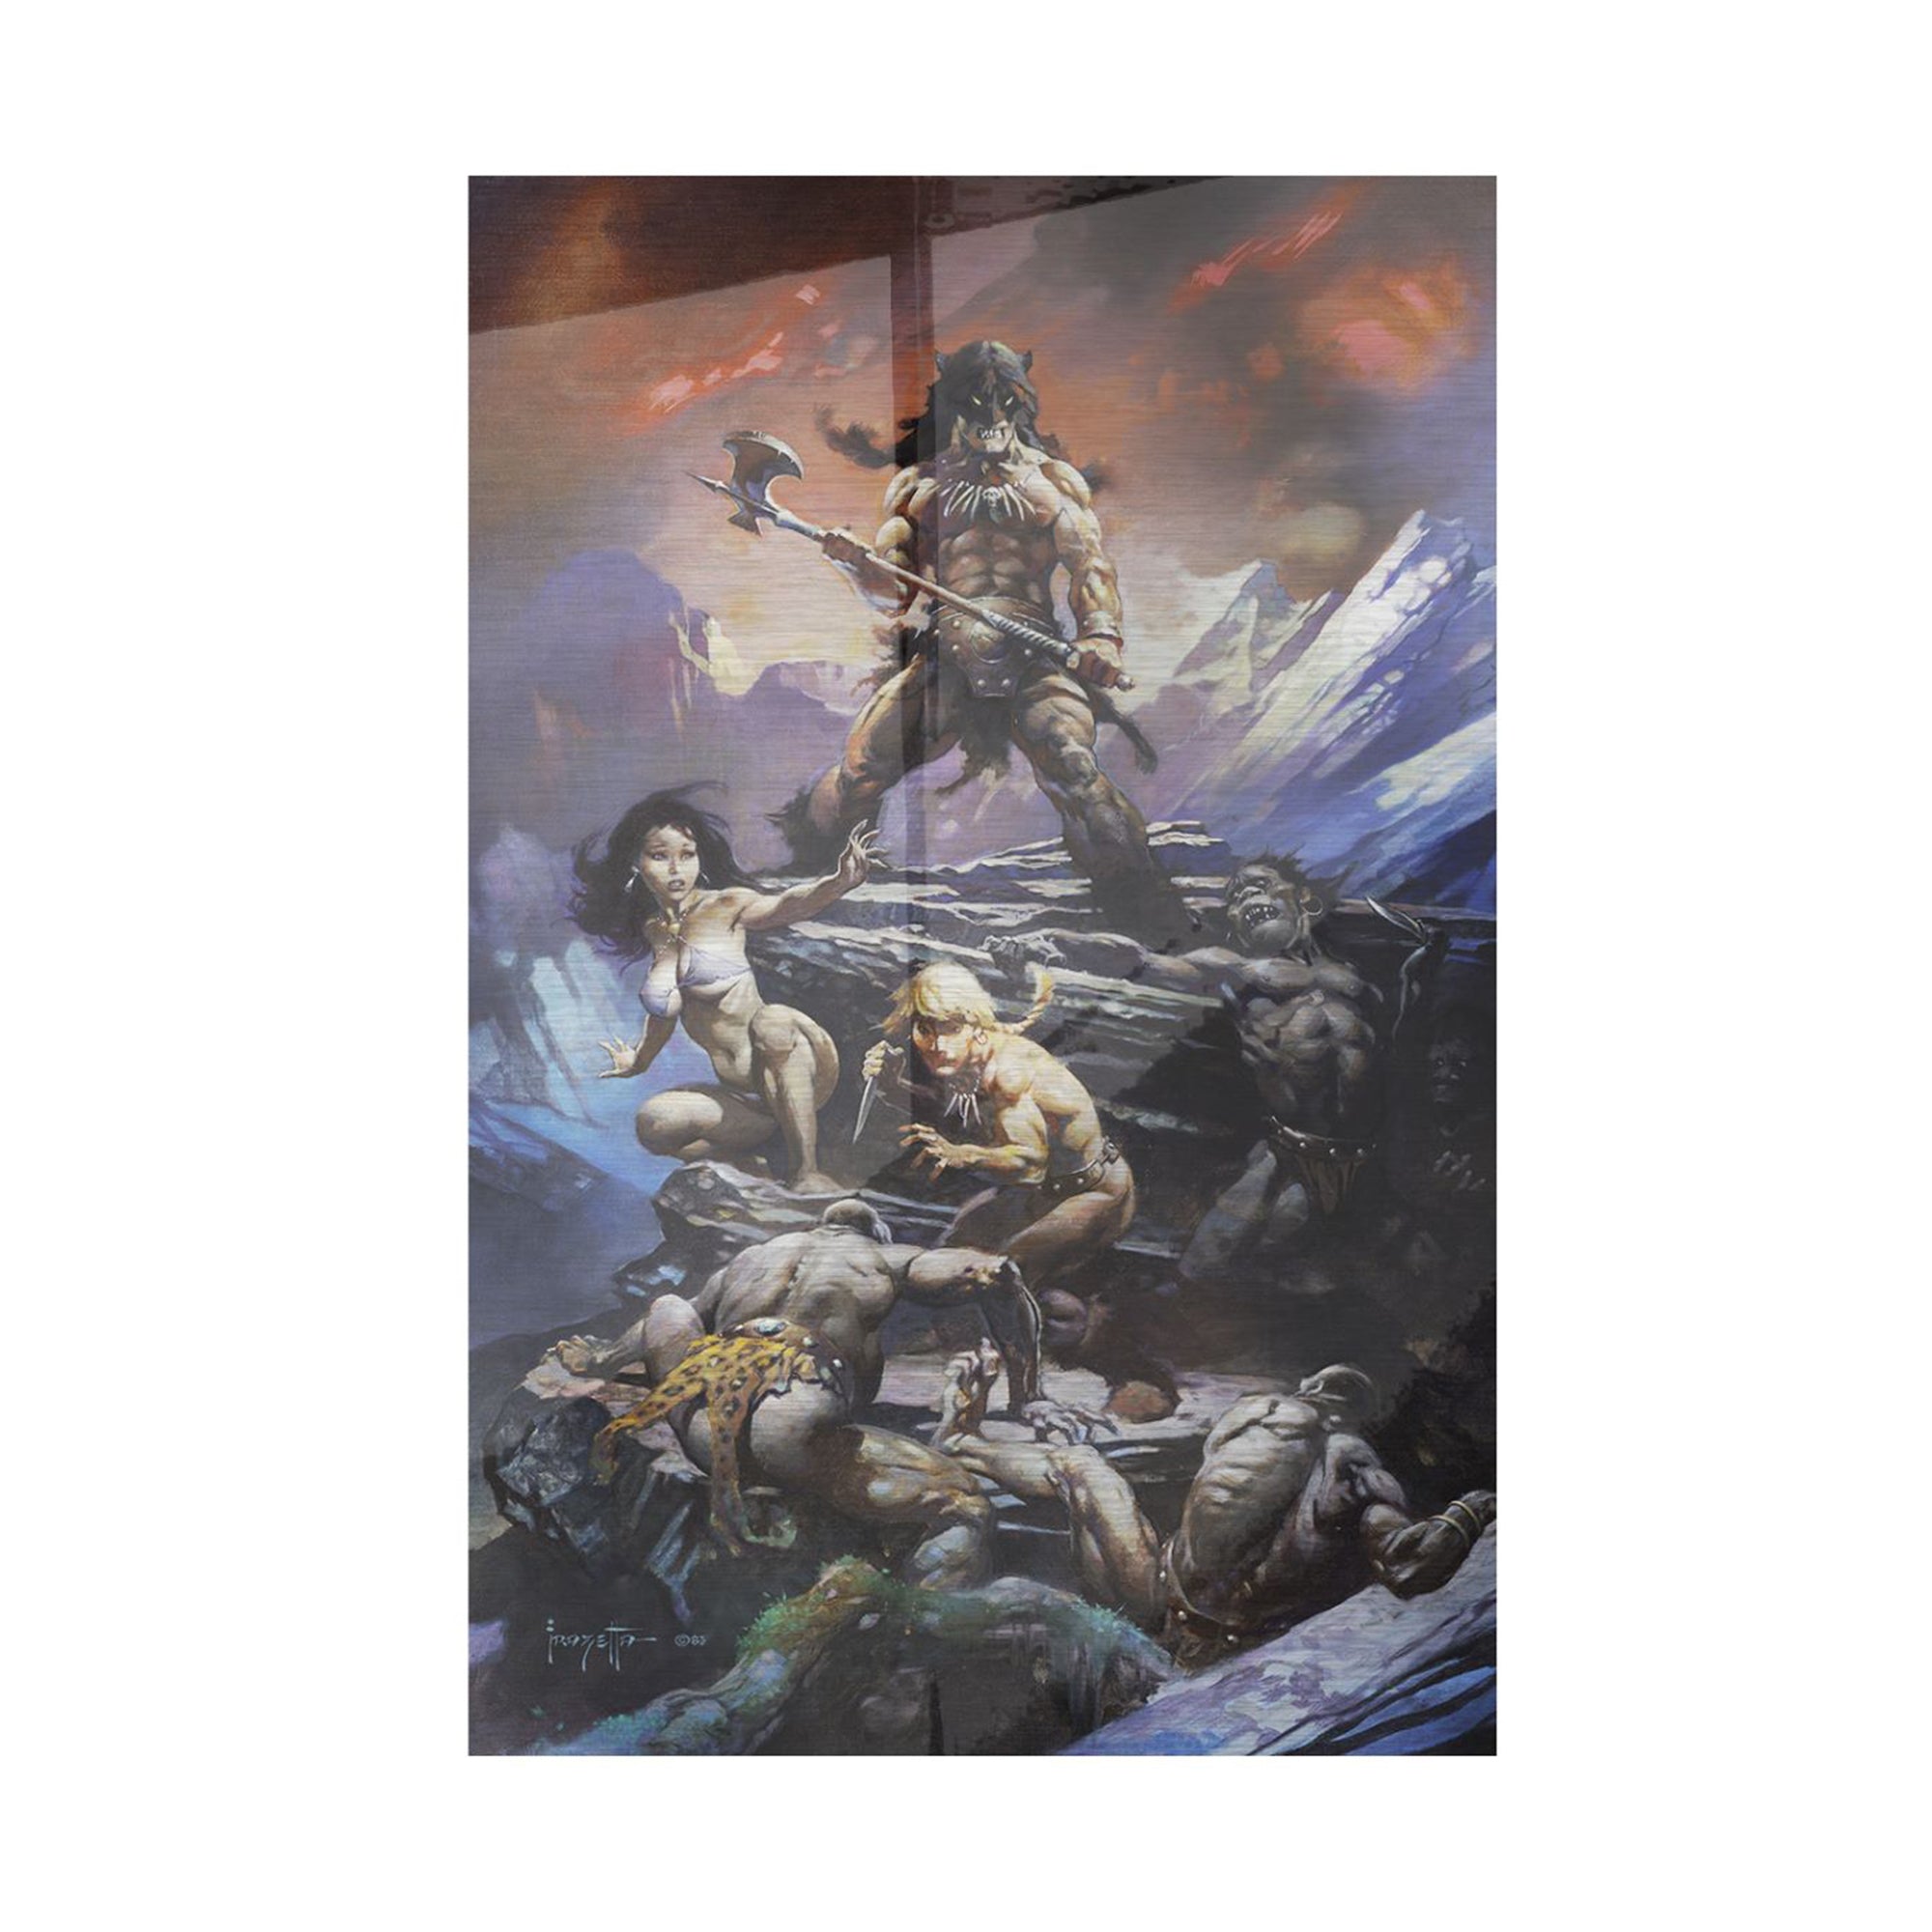 FIRE AND ICE #1 FRANK FRAZETTA MOVIE POSTER METAL COVER (FG EXCLUSIVE)